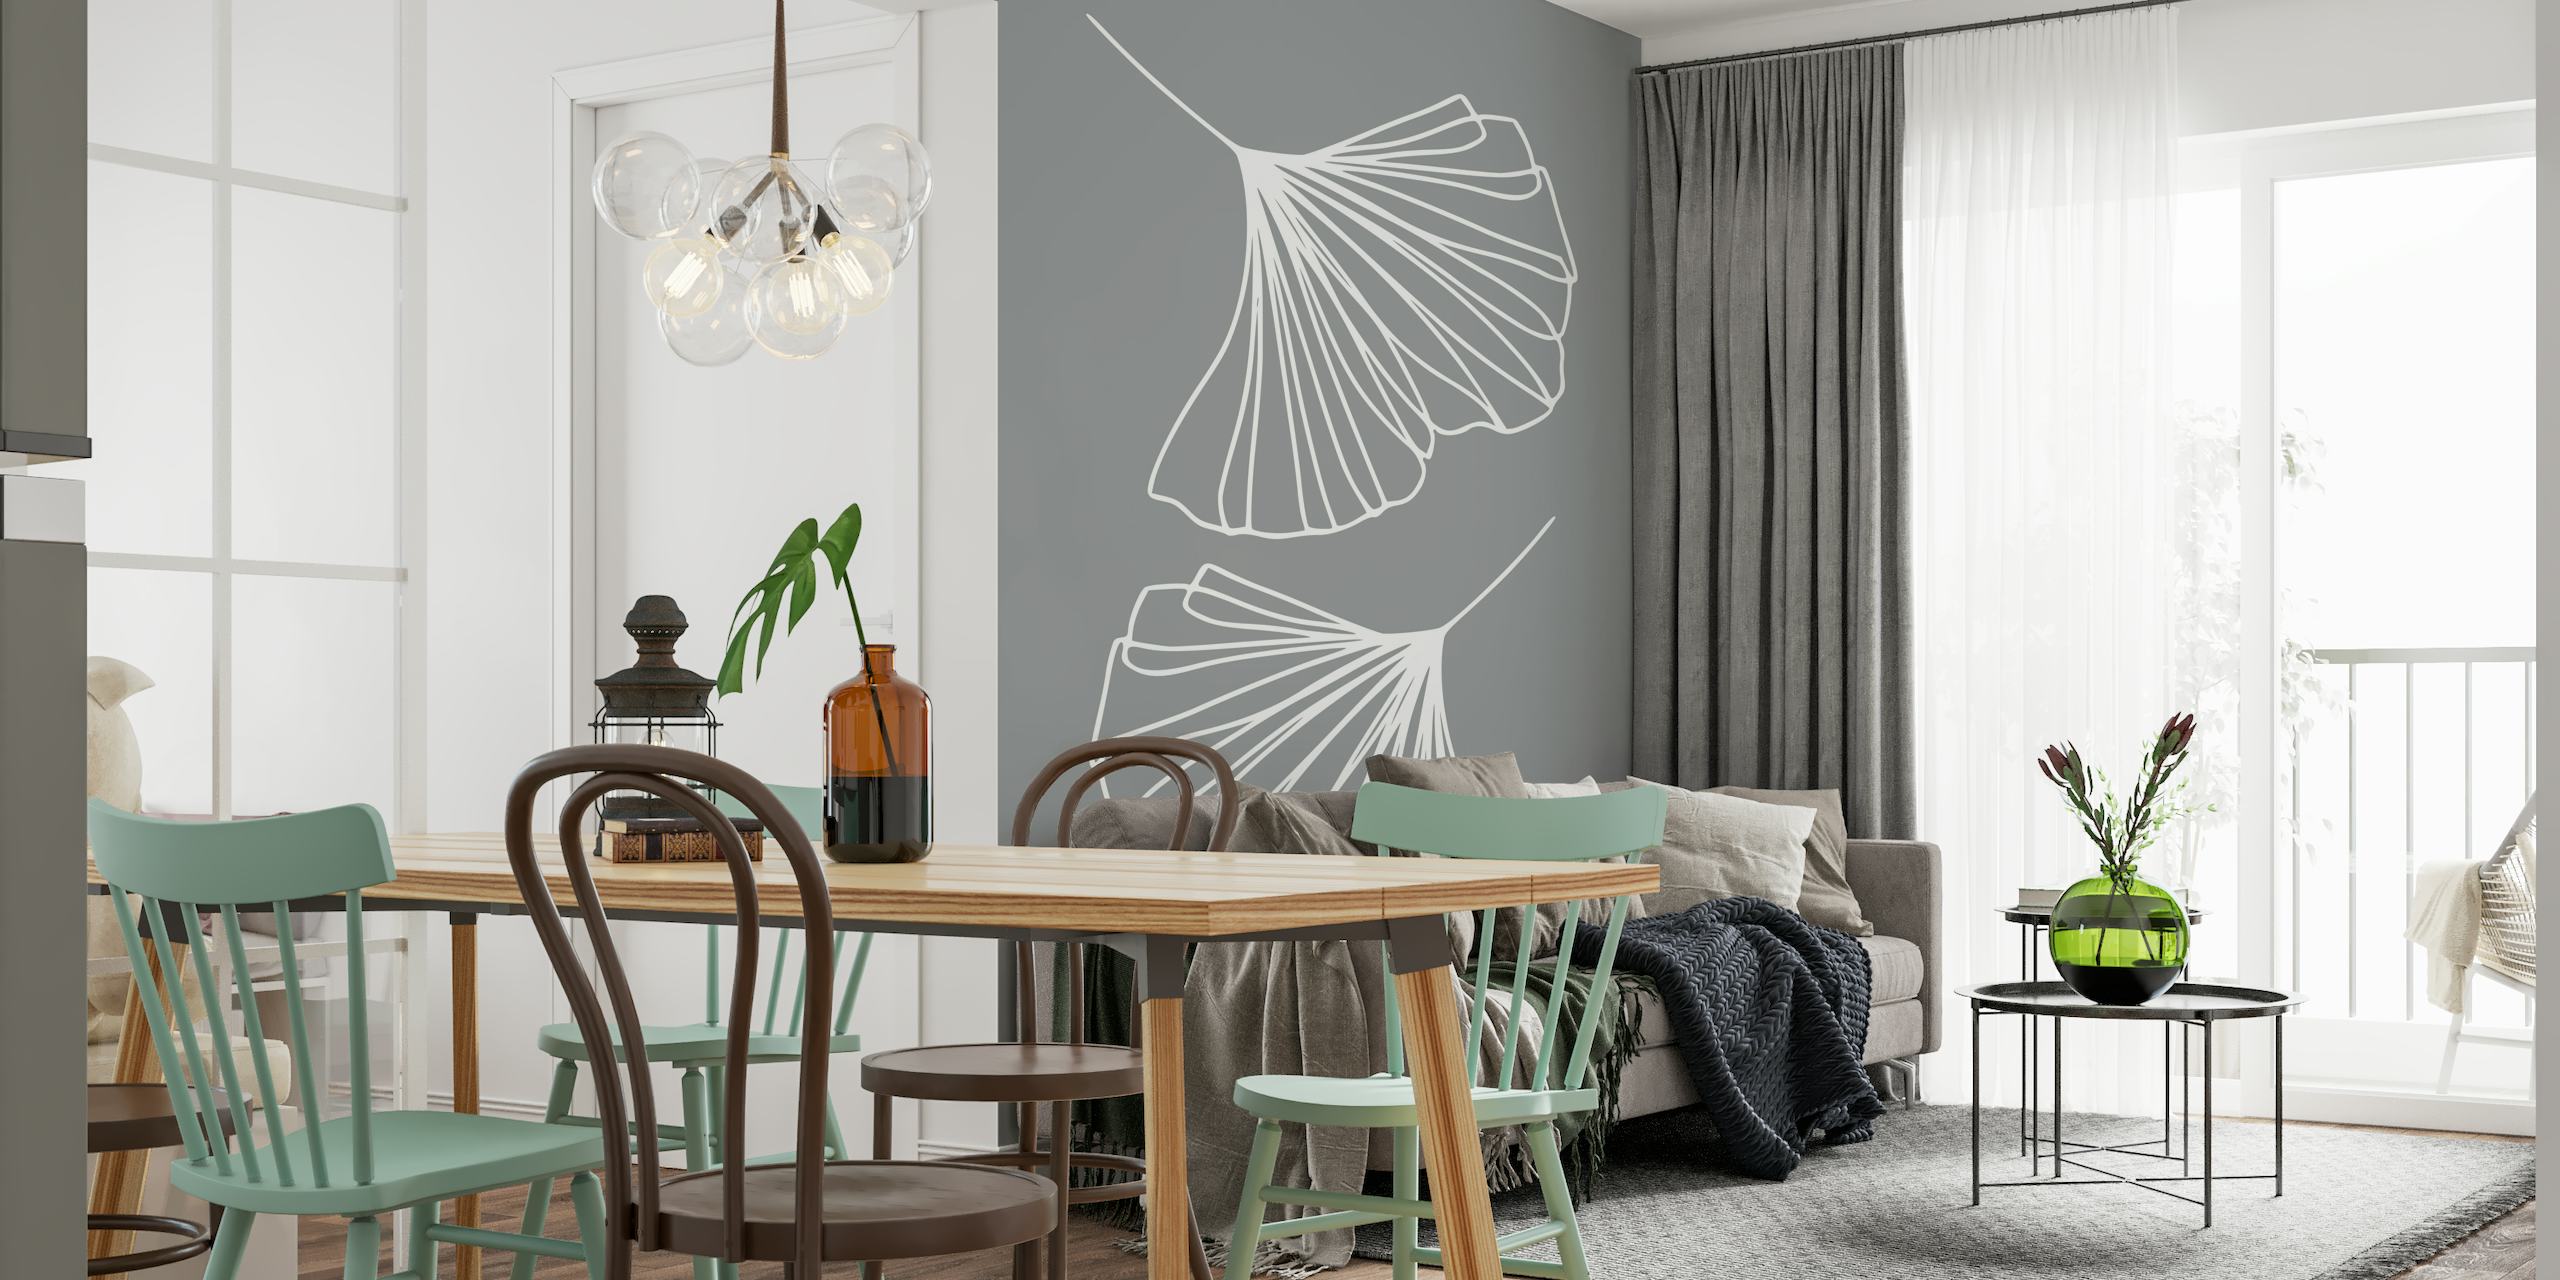 Ginkgo Leaves Ultimate Gray wall mural with white line art on gray background